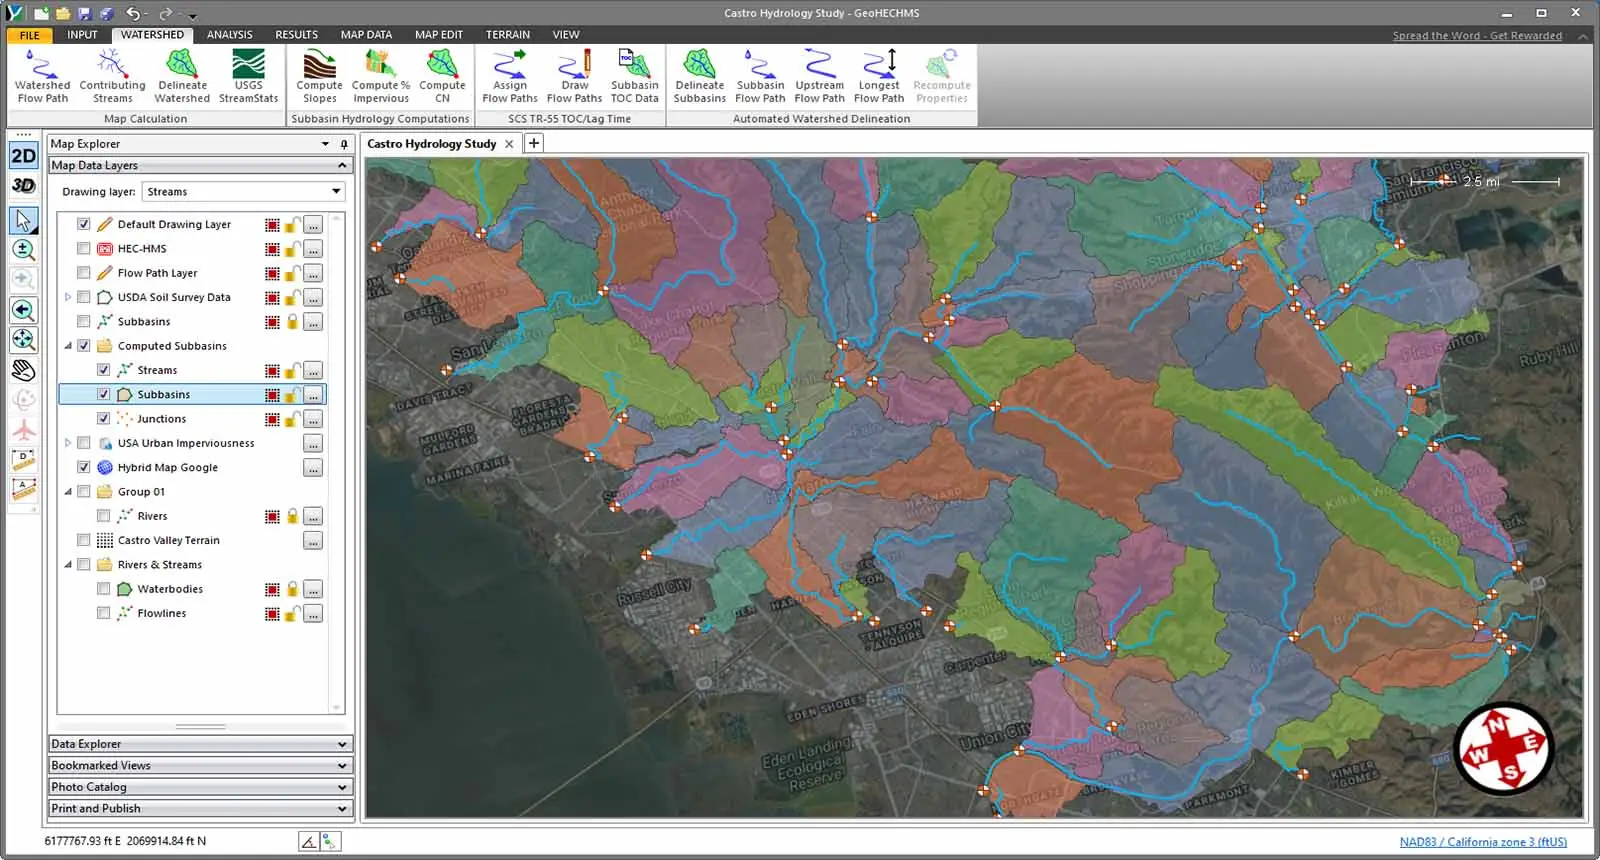 Delineate subbasins and watersheds from 3D digital elevation terrain data. Utilize AutoCAD Civil 3D surfaces, MicroStation surfaces, contours, TINs, DTMs, DEMs, survey points, LiDAR, and other external digital elevation terrain data.